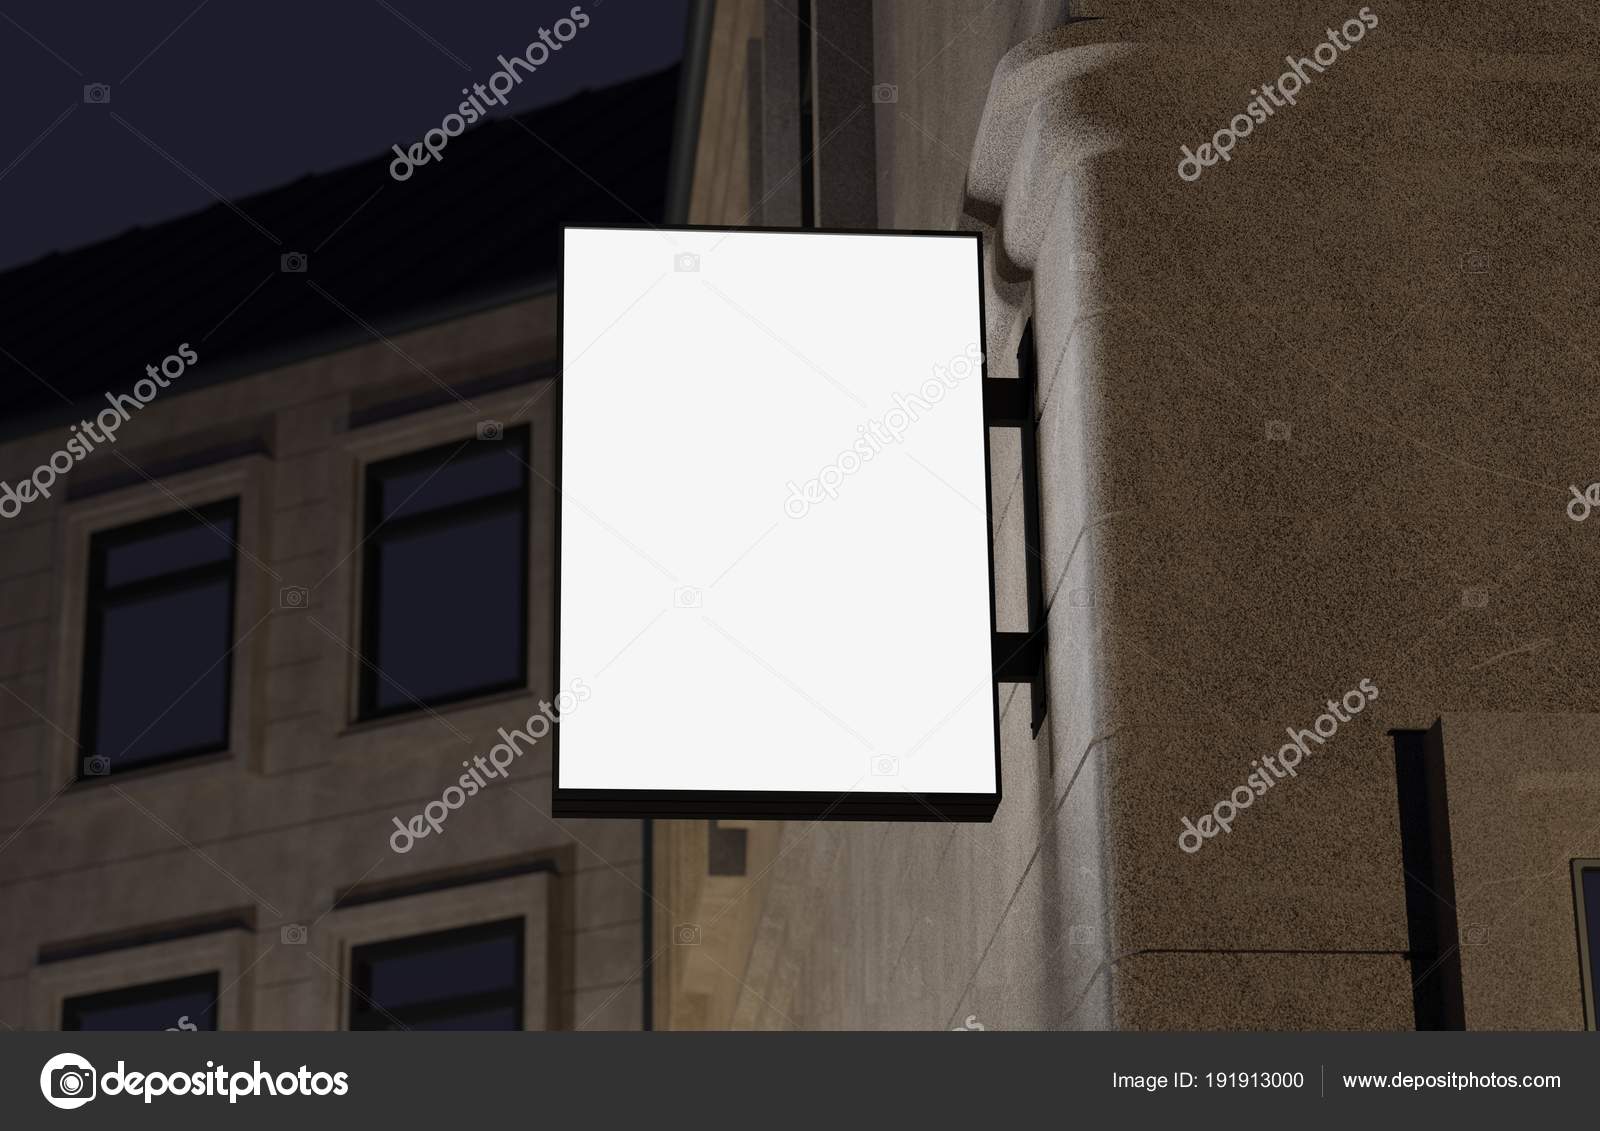 Download Blank Outdoor Signage Signboard Mockup Sign 3d Rendering Stock Photo Image By C Barbra Ford 191913000